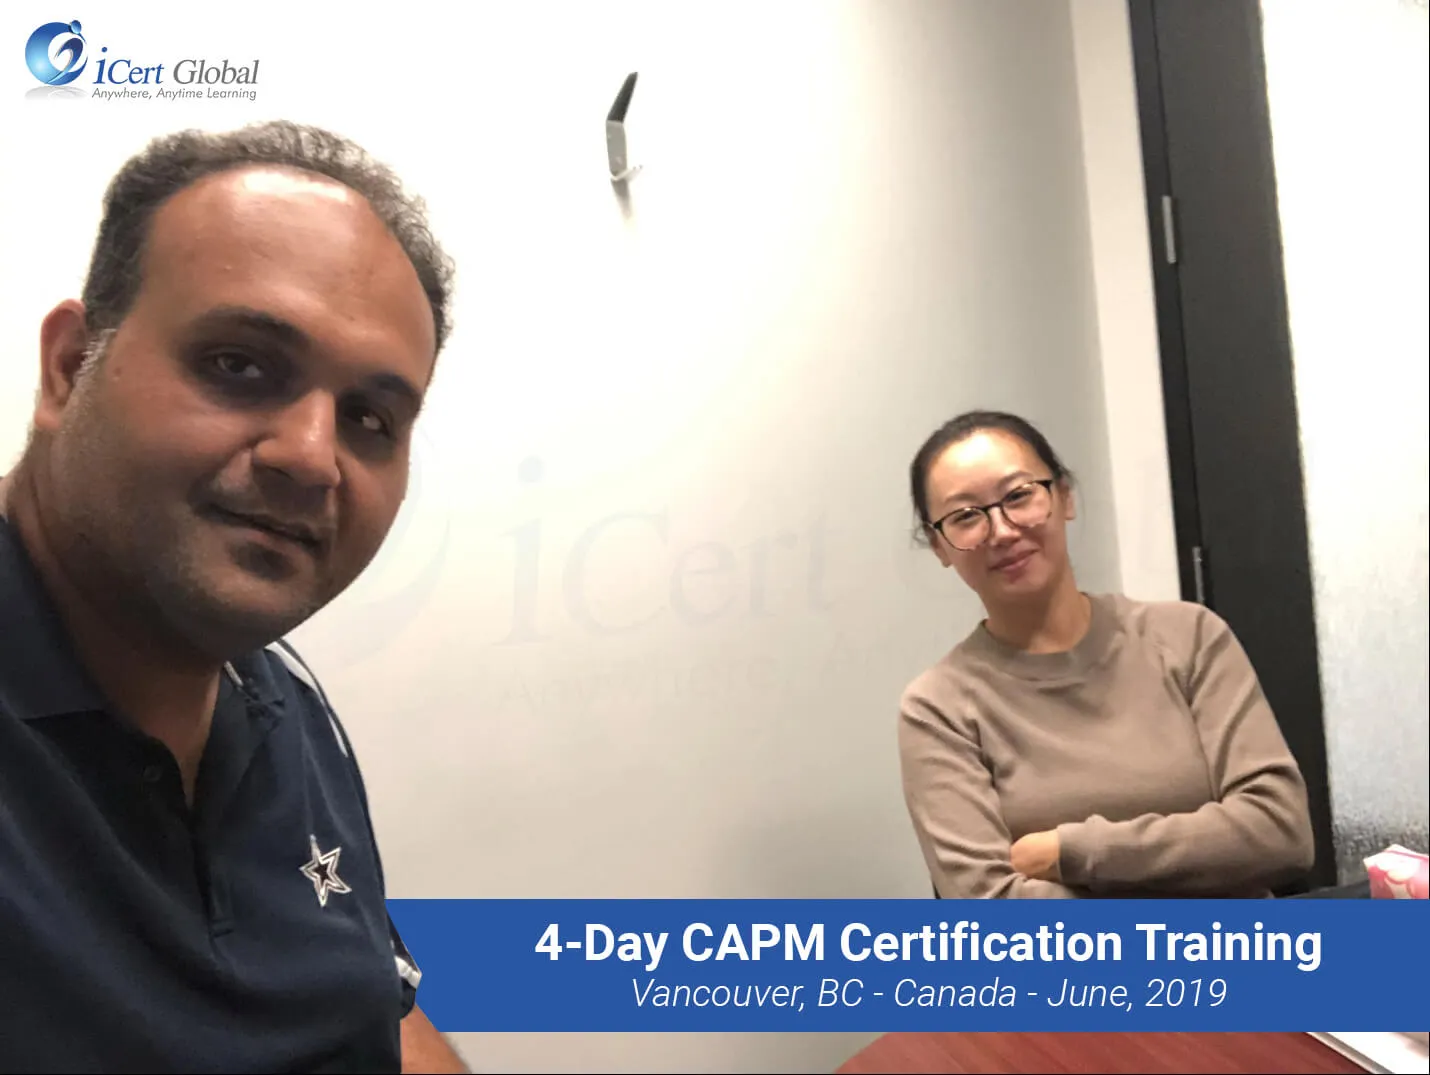 PMP Certification Training Course in Carlsbad, CA in June 2019 